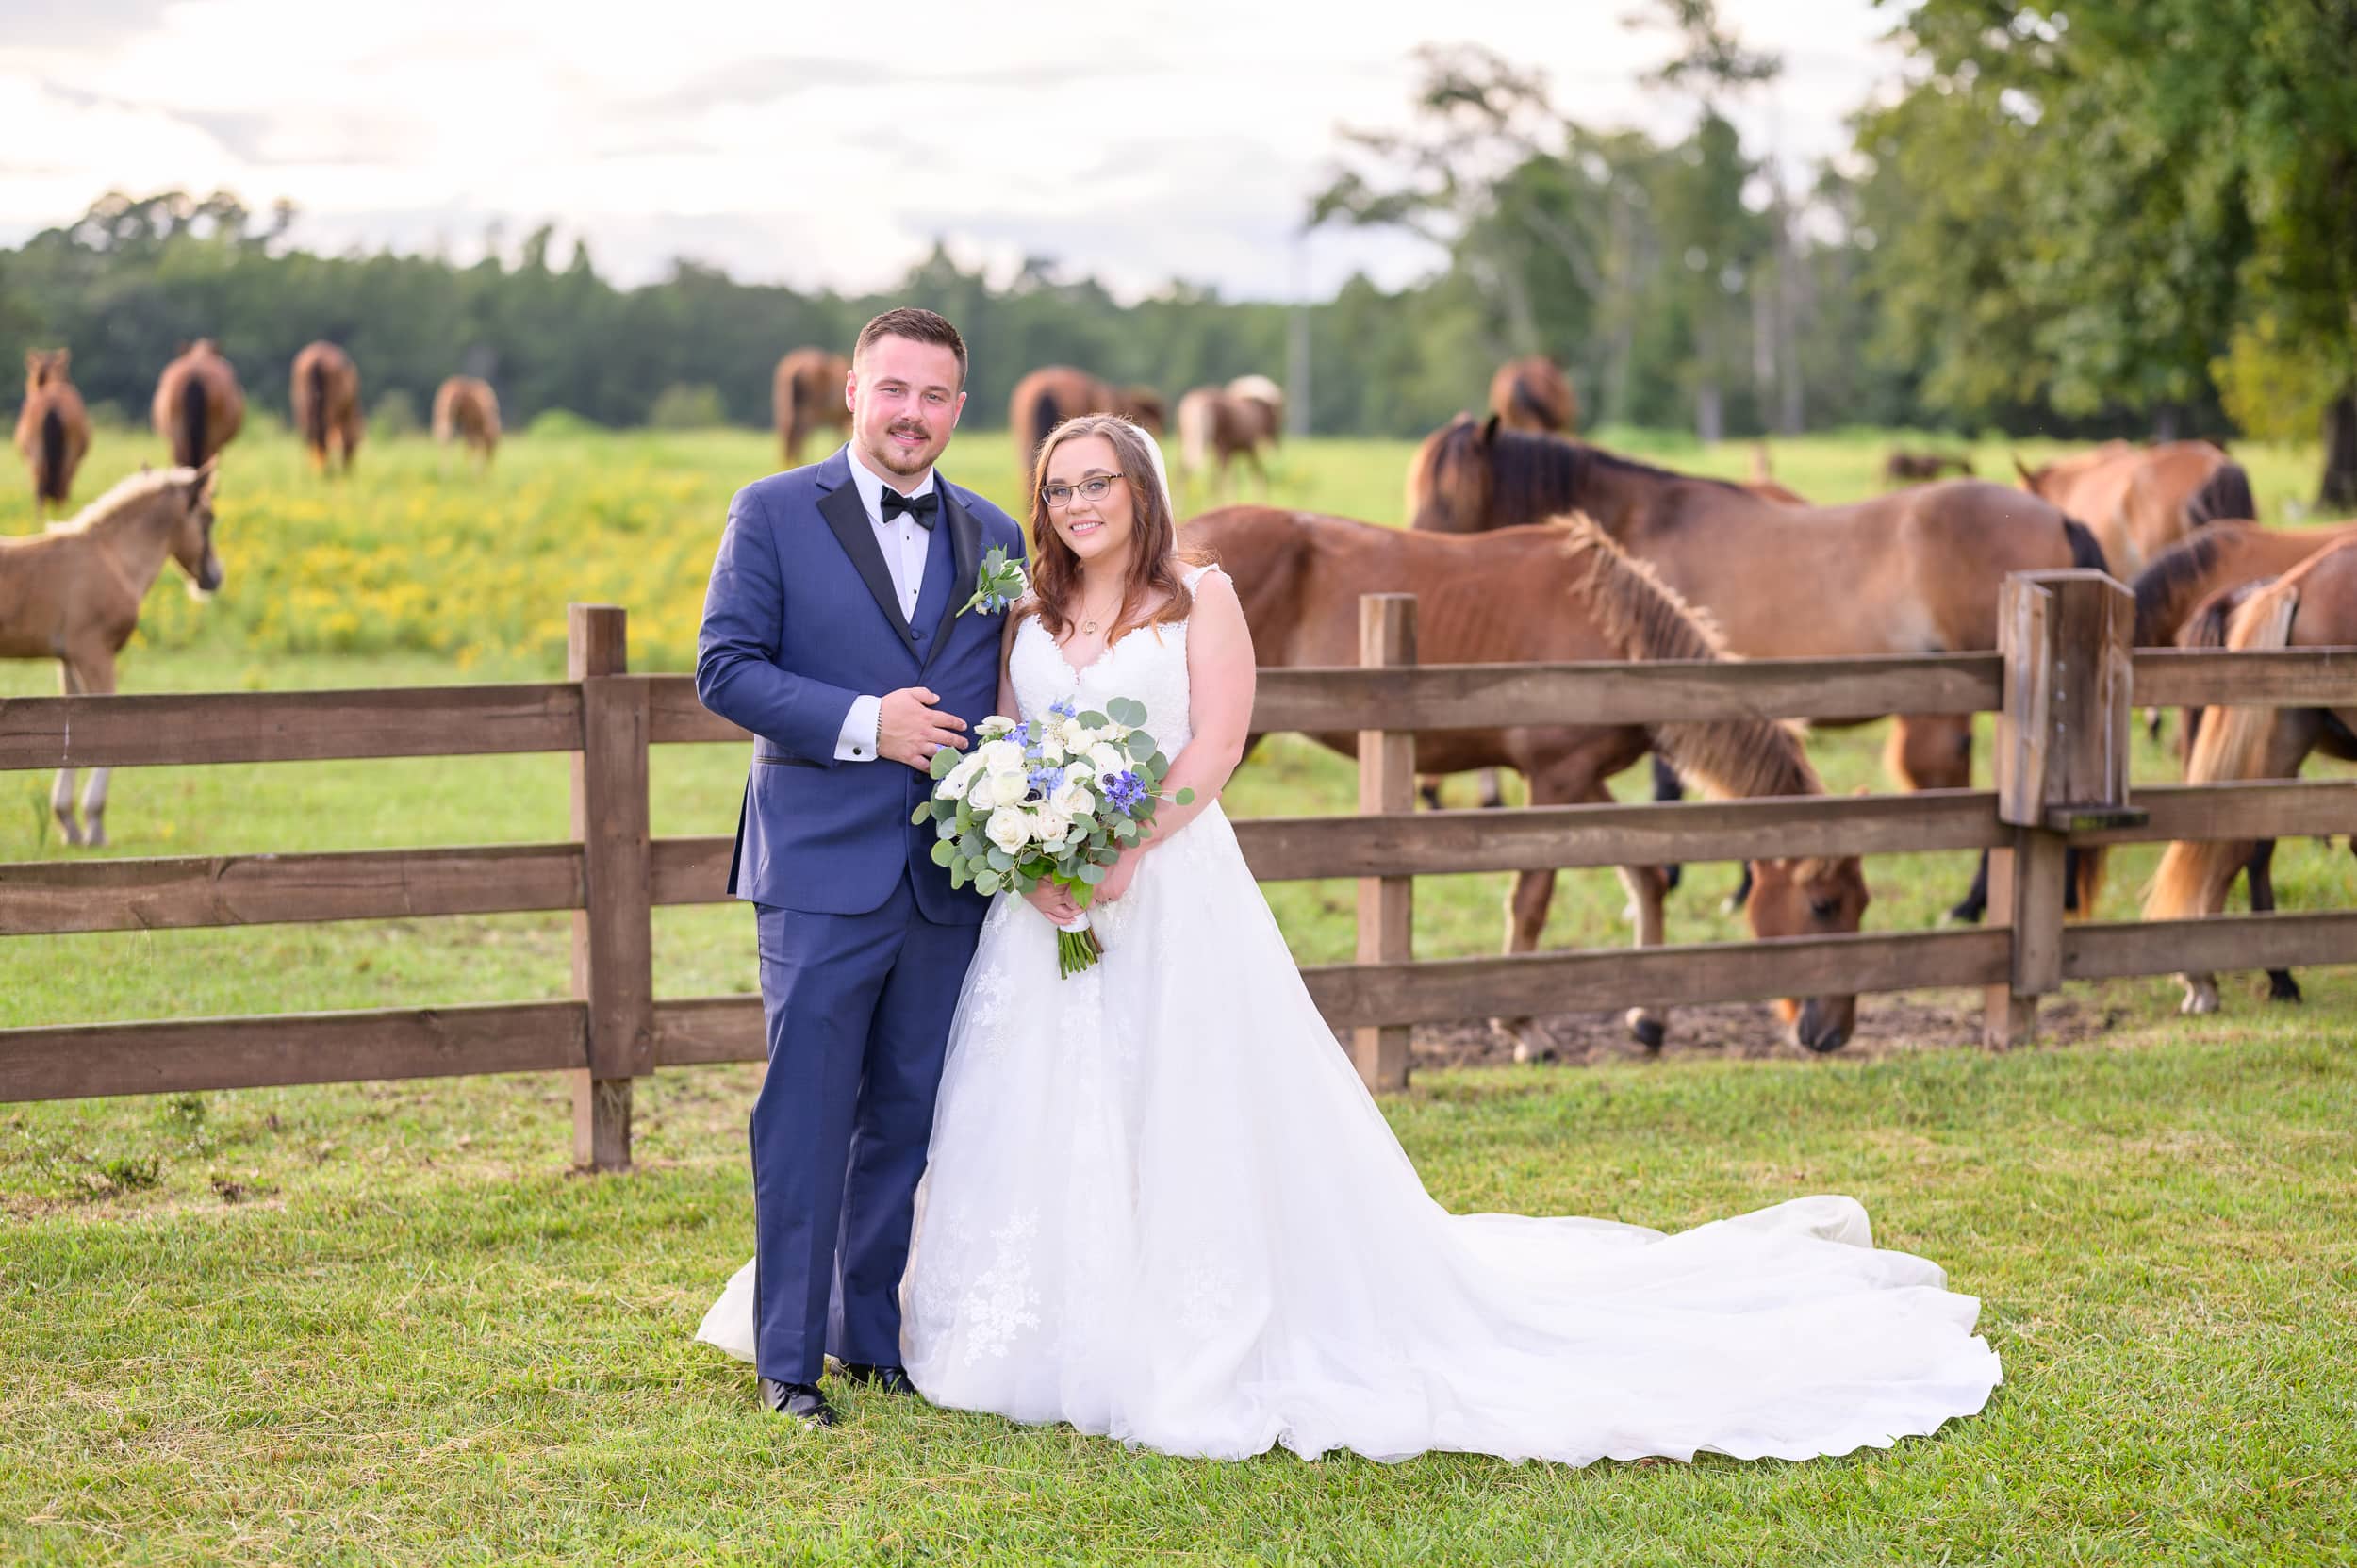 Bride and groom standing in front of the wild horses - Wildhorse at Parker Farms